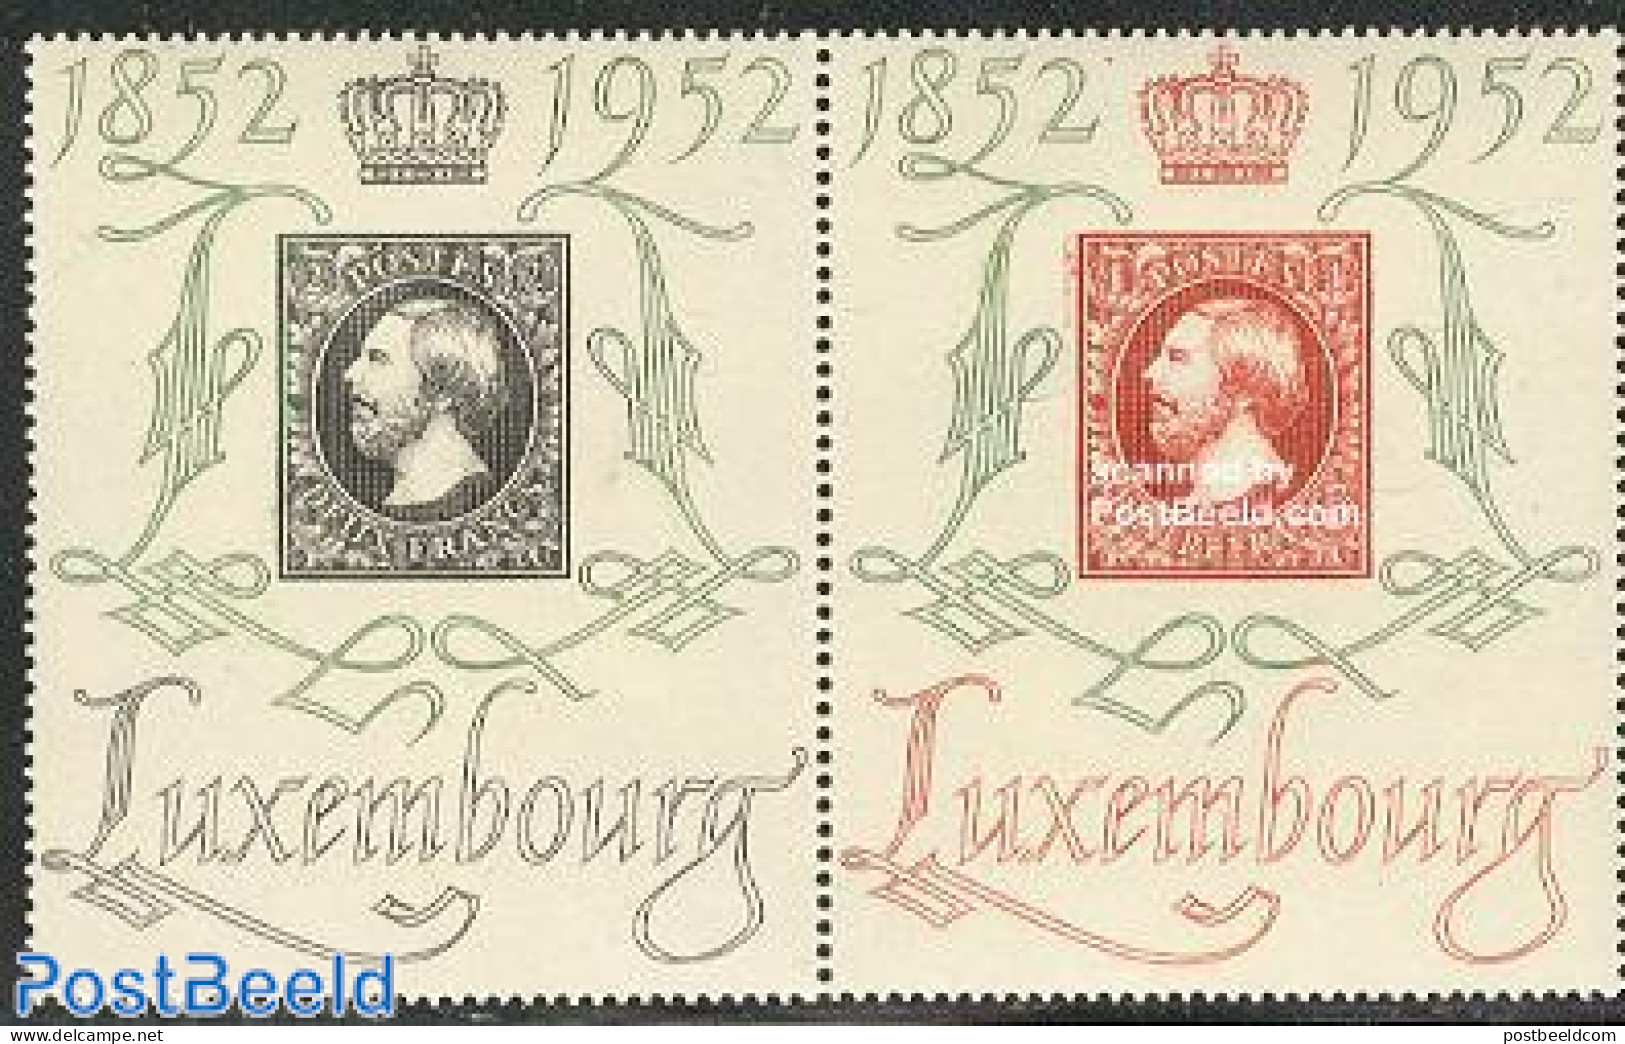 Luxemburg 1952 Centilux 2v [:], Mint NH, 100 Years Stamps - Philately - Stamps On Stamps - Ongebruikt